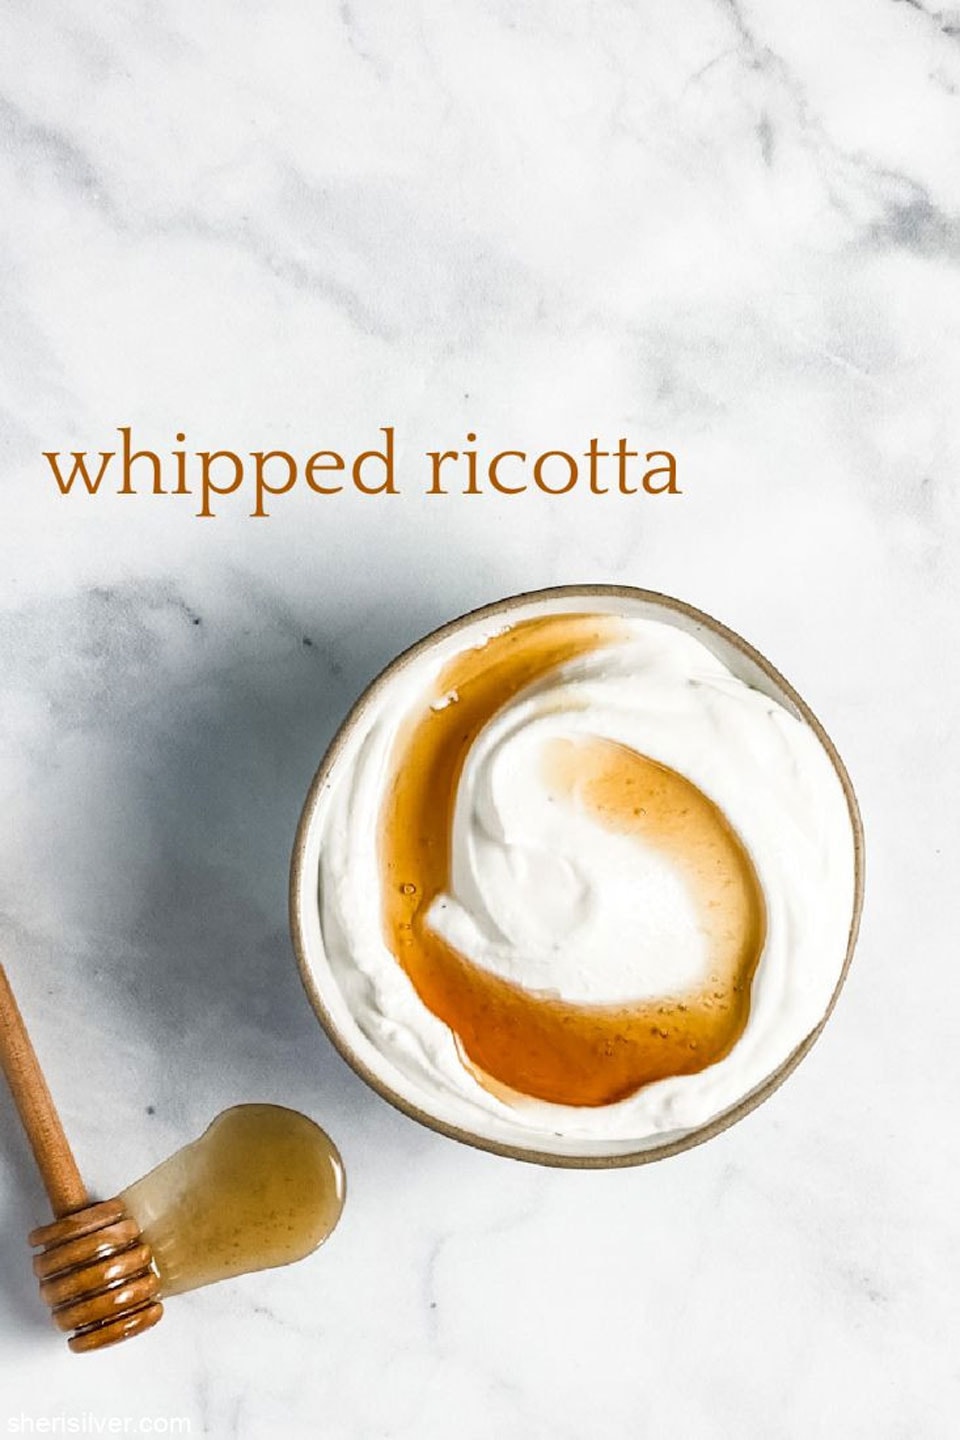 Lifestyle blogger Annie Diamond shares her friend Sheri Silver's recipe for whipped ricotta 